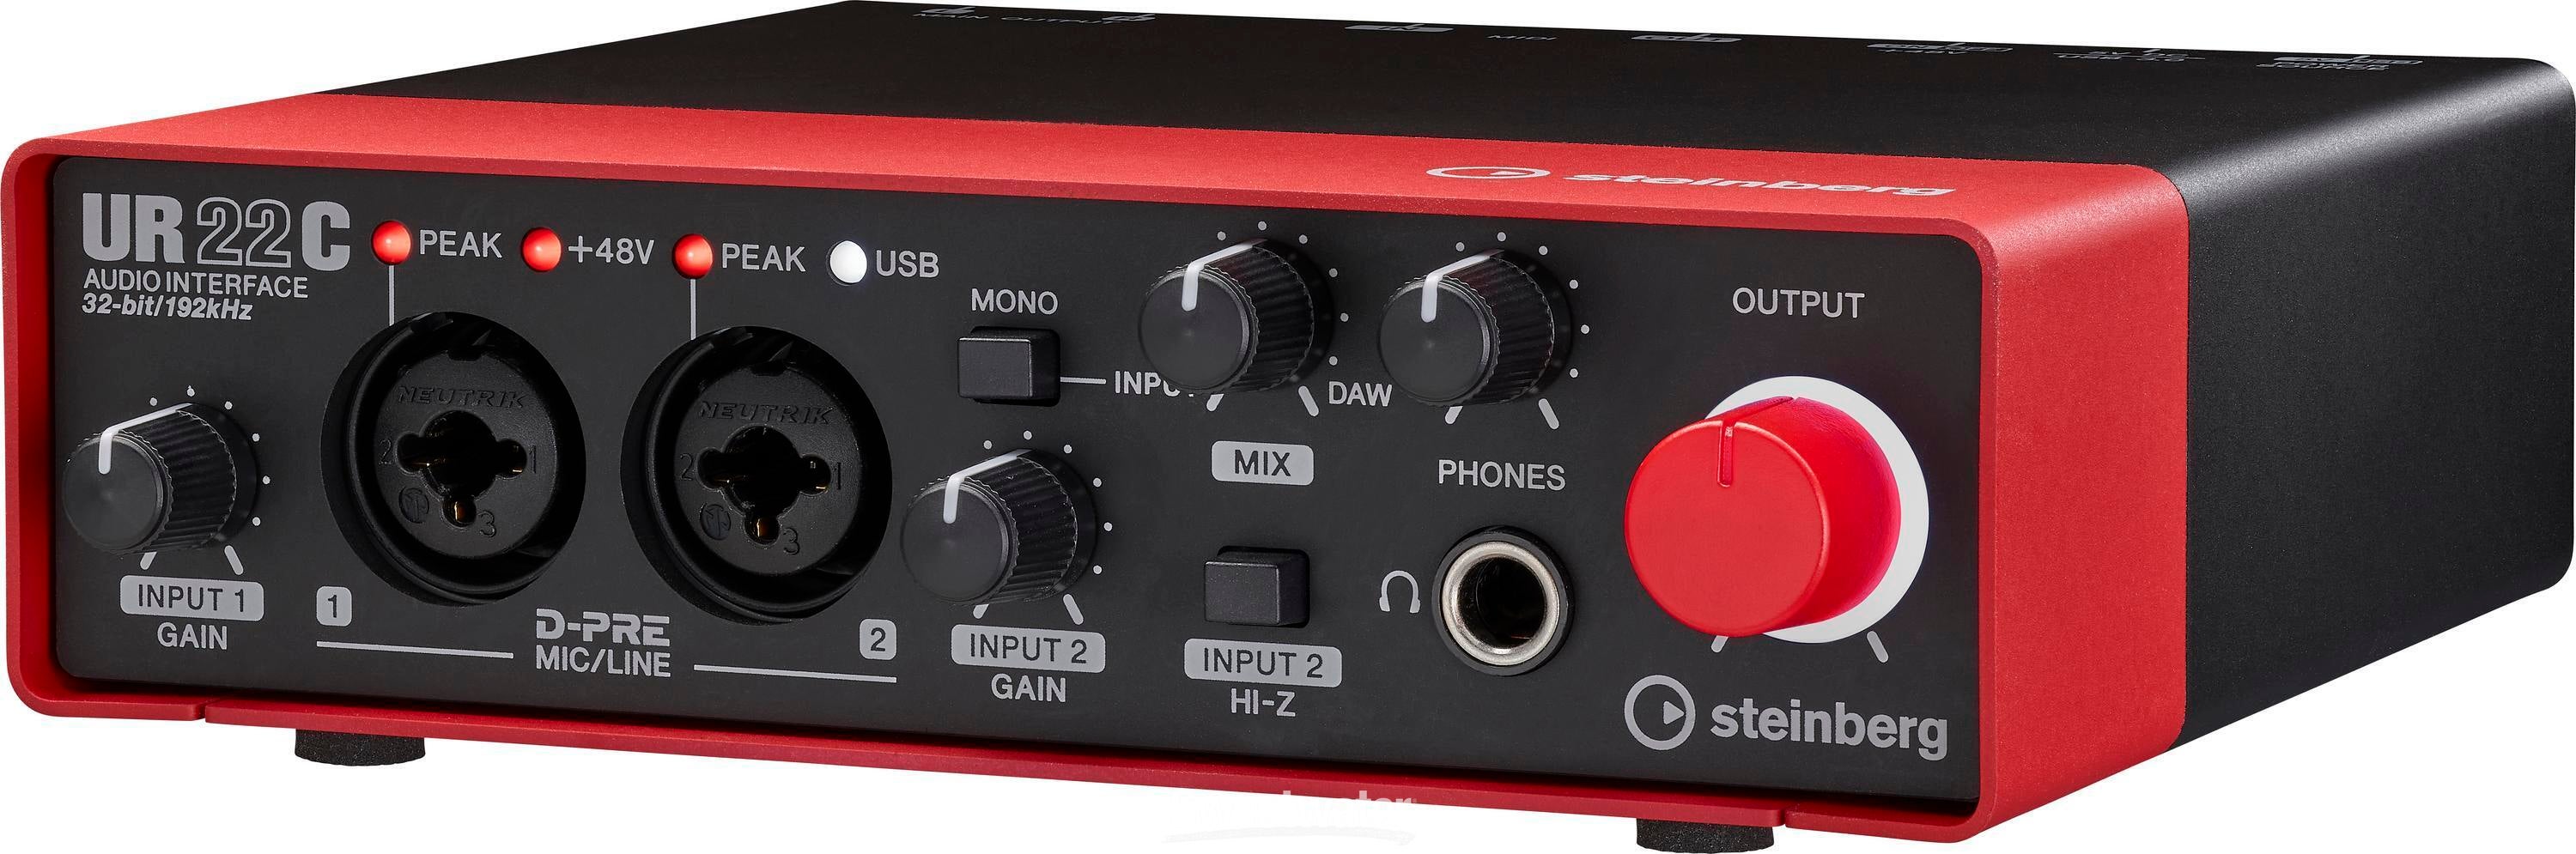 Steinberg UR22C USB Audio Interface - Red | Sweetwater